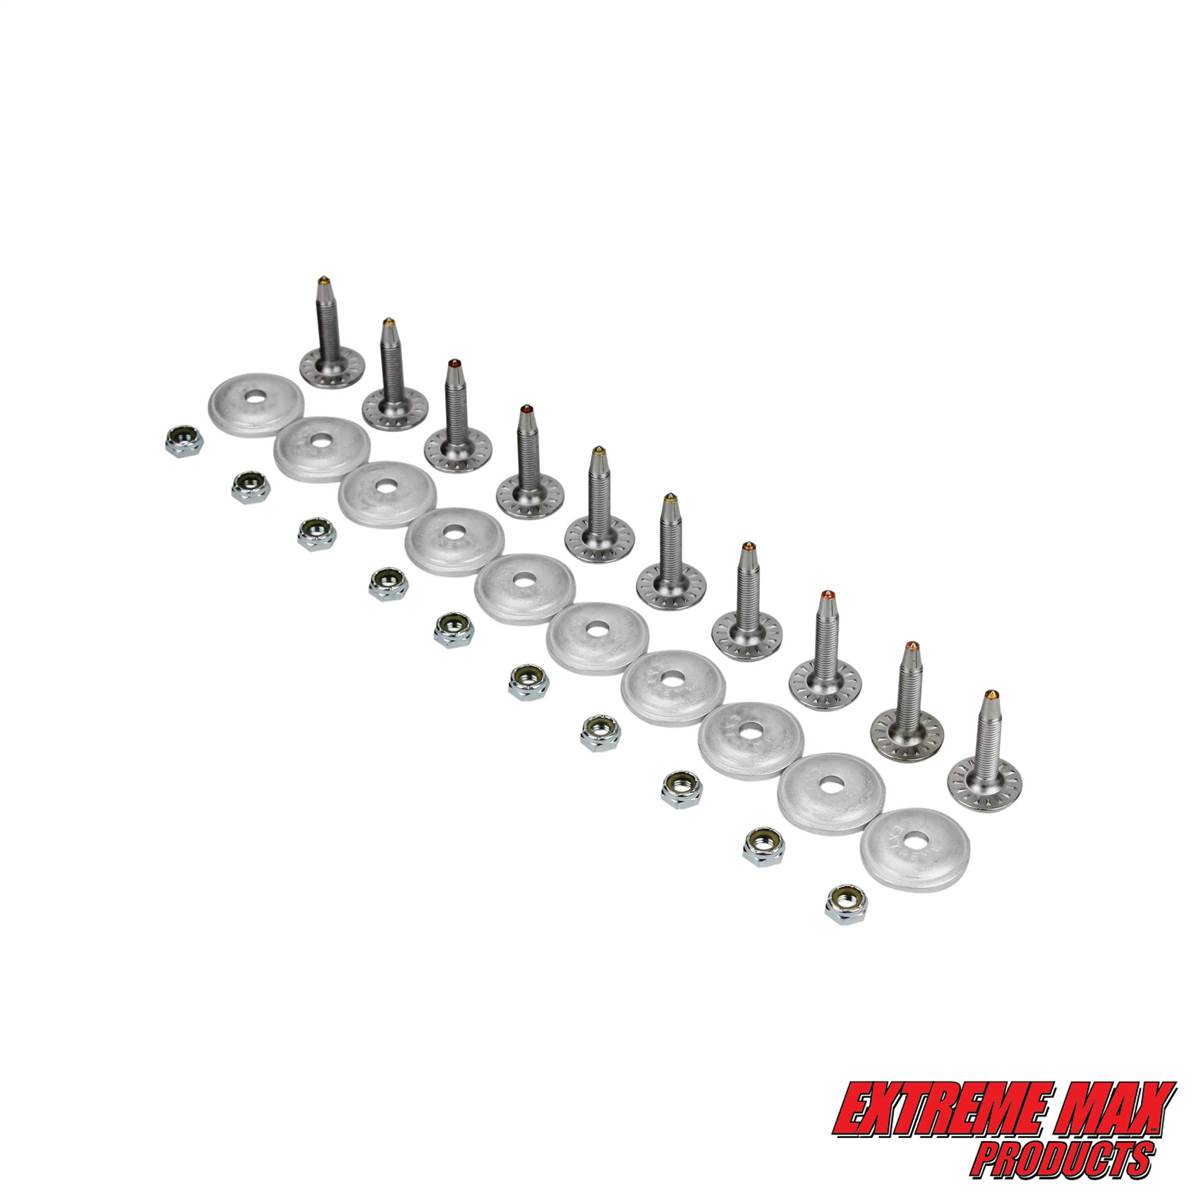 Extreme Max 5001.5379 Stainless Steel Platinum Plus Snowmobile Studs 1.520 Length Pack of 48